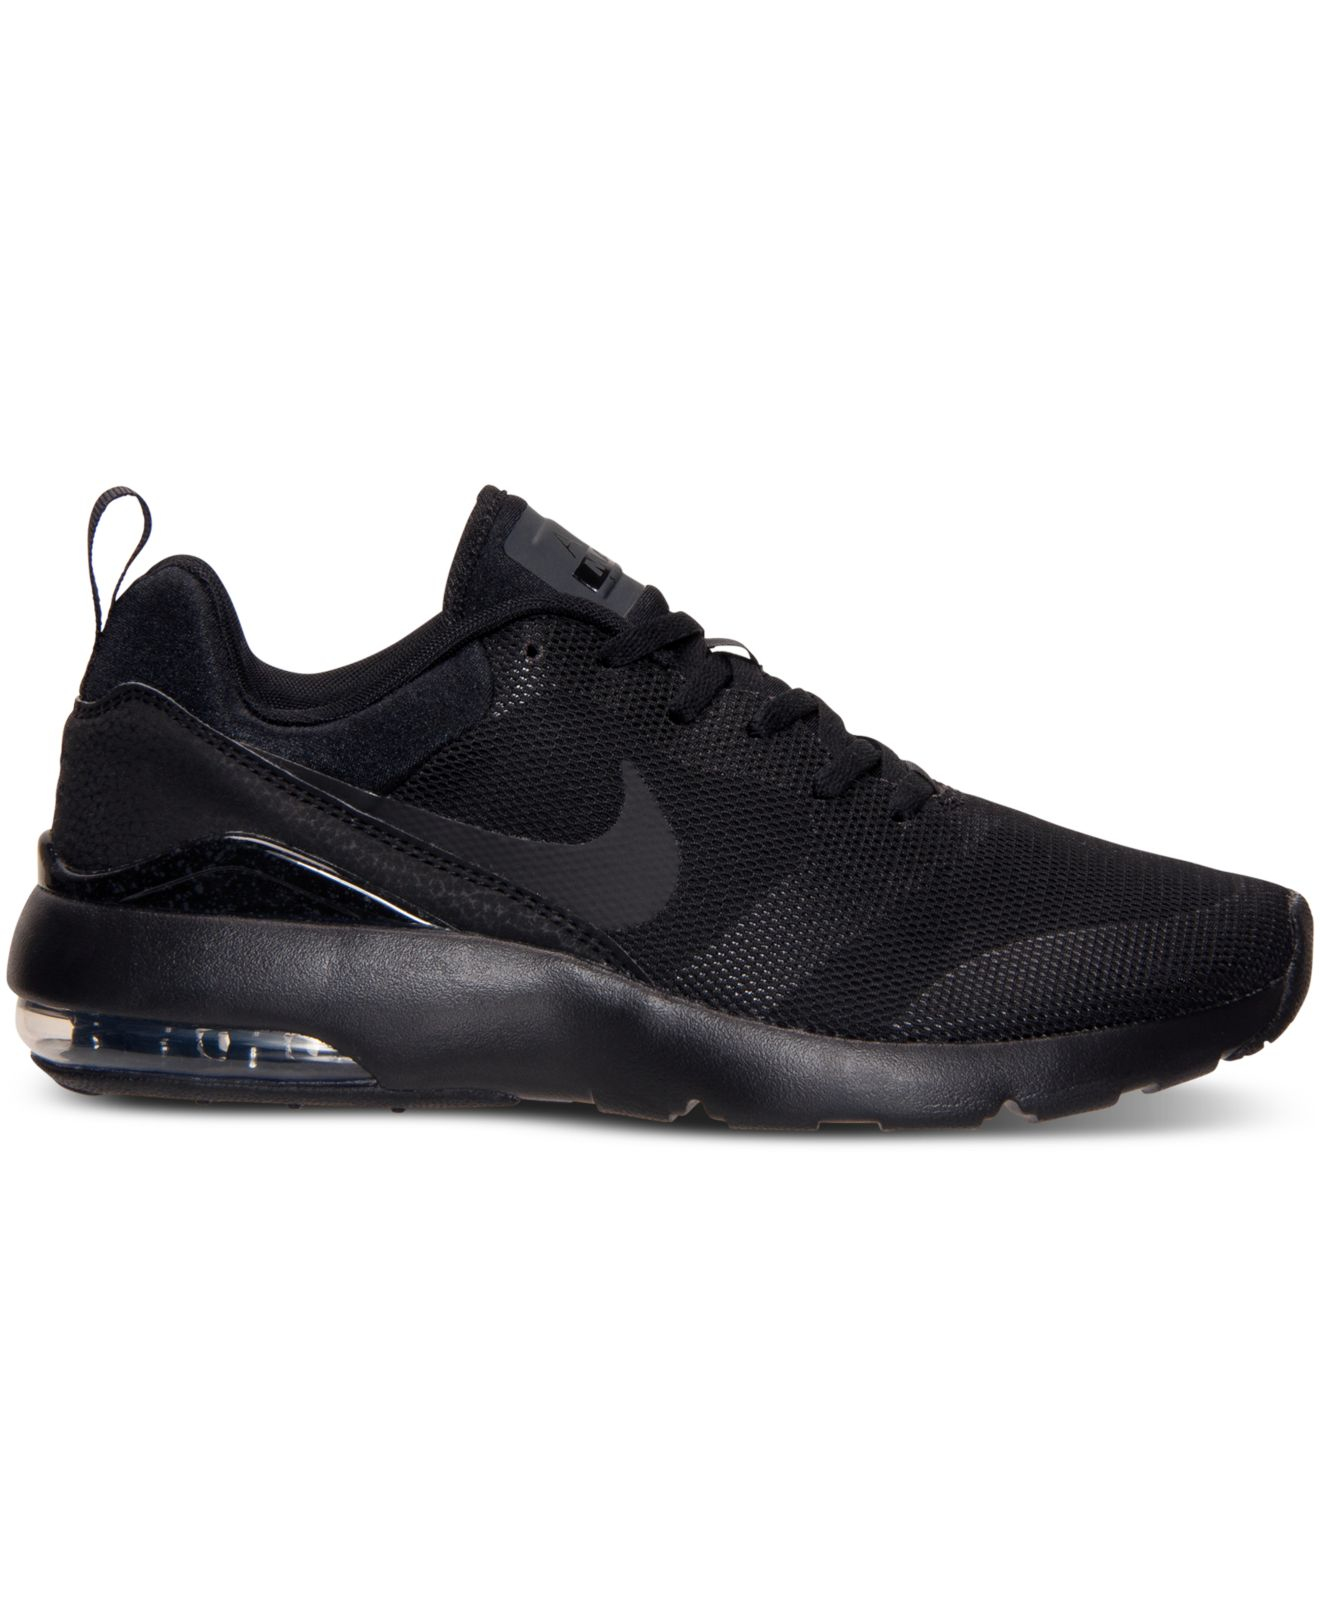 Lyst - Nike Women's Air Max Siren Running Sneakers From Finish Line in Black